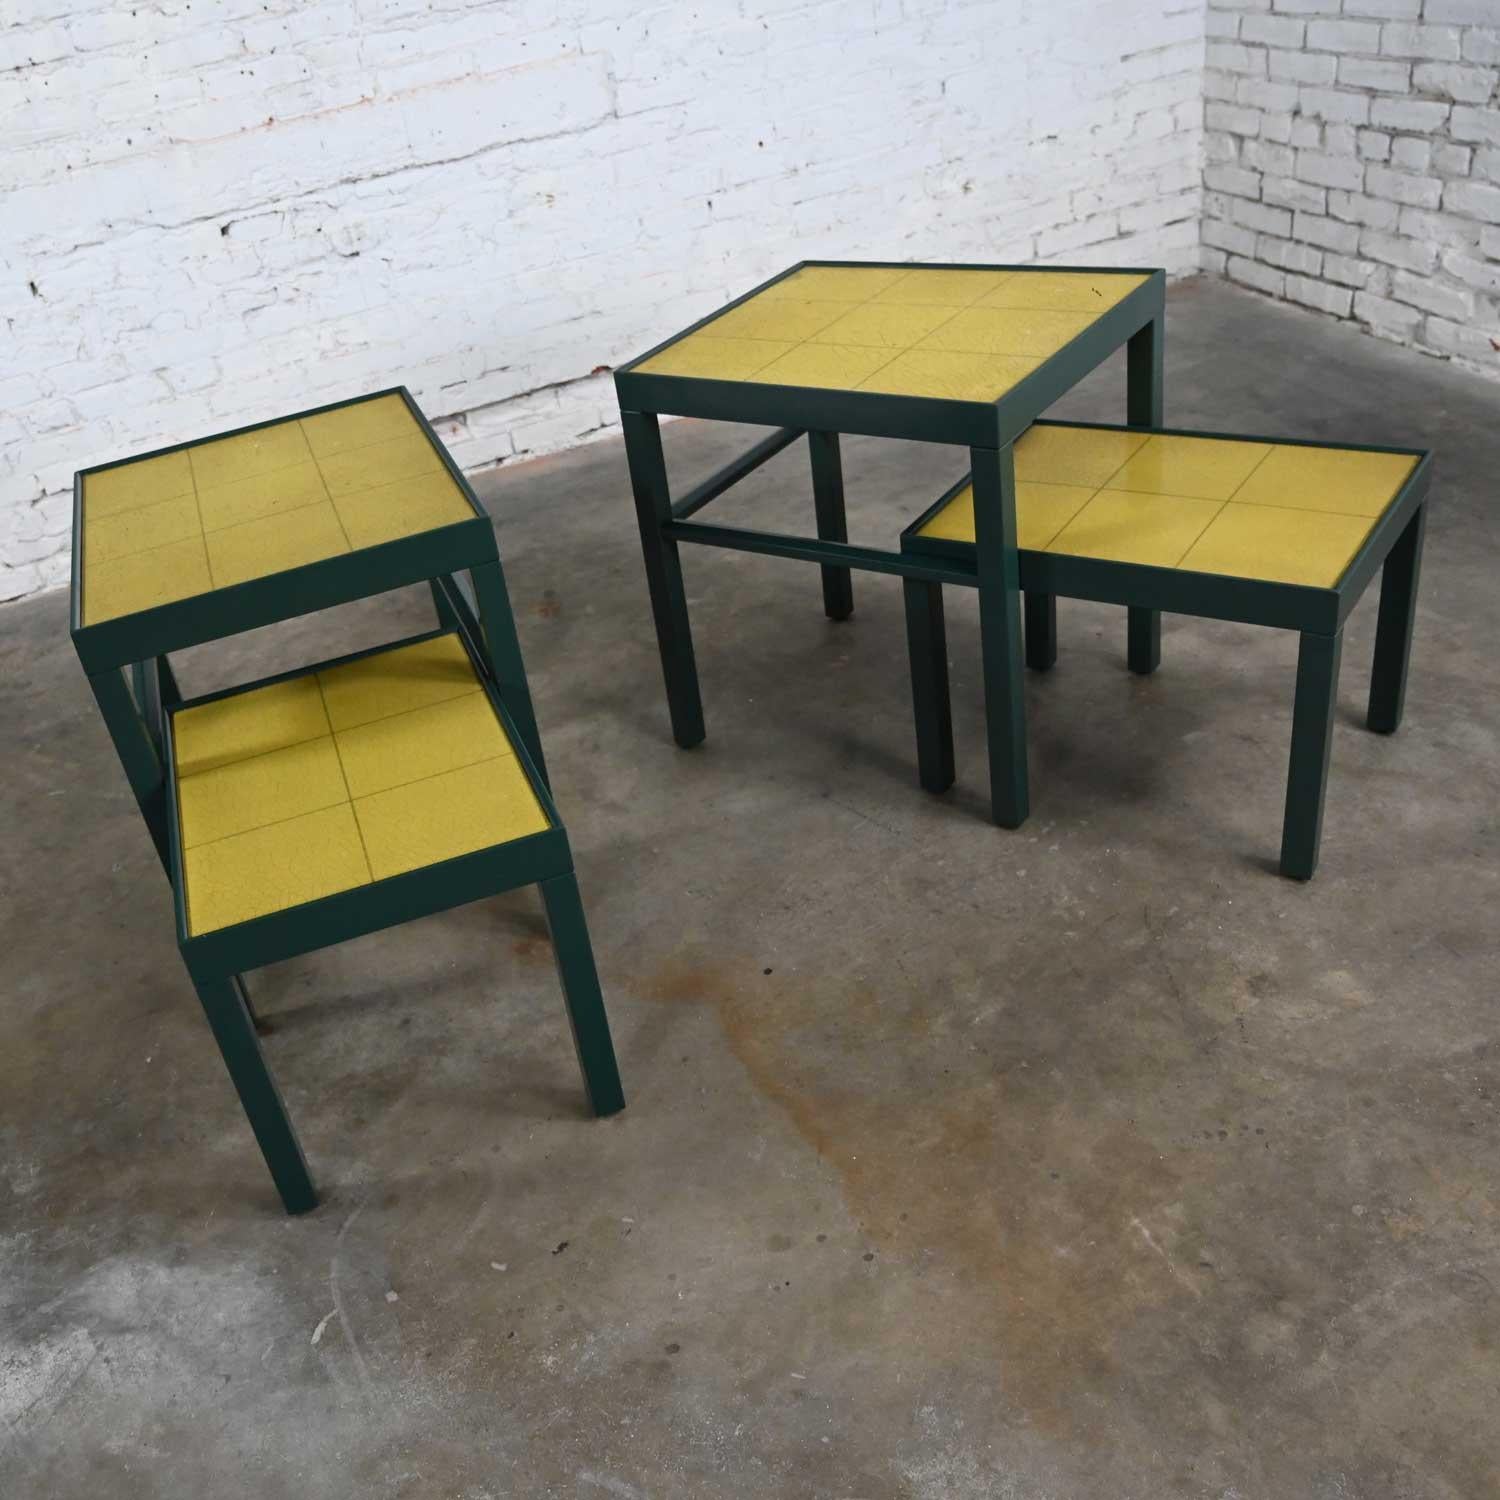 Gorgeous vintage Campaign or Chinoiserie dark green painted modified Parson�’s nesting tables with chartreuse leather tops two sets of 2 tables by Kittinger Furniture. Beautiful condition, keeping in mind that these are vintage and not new so will